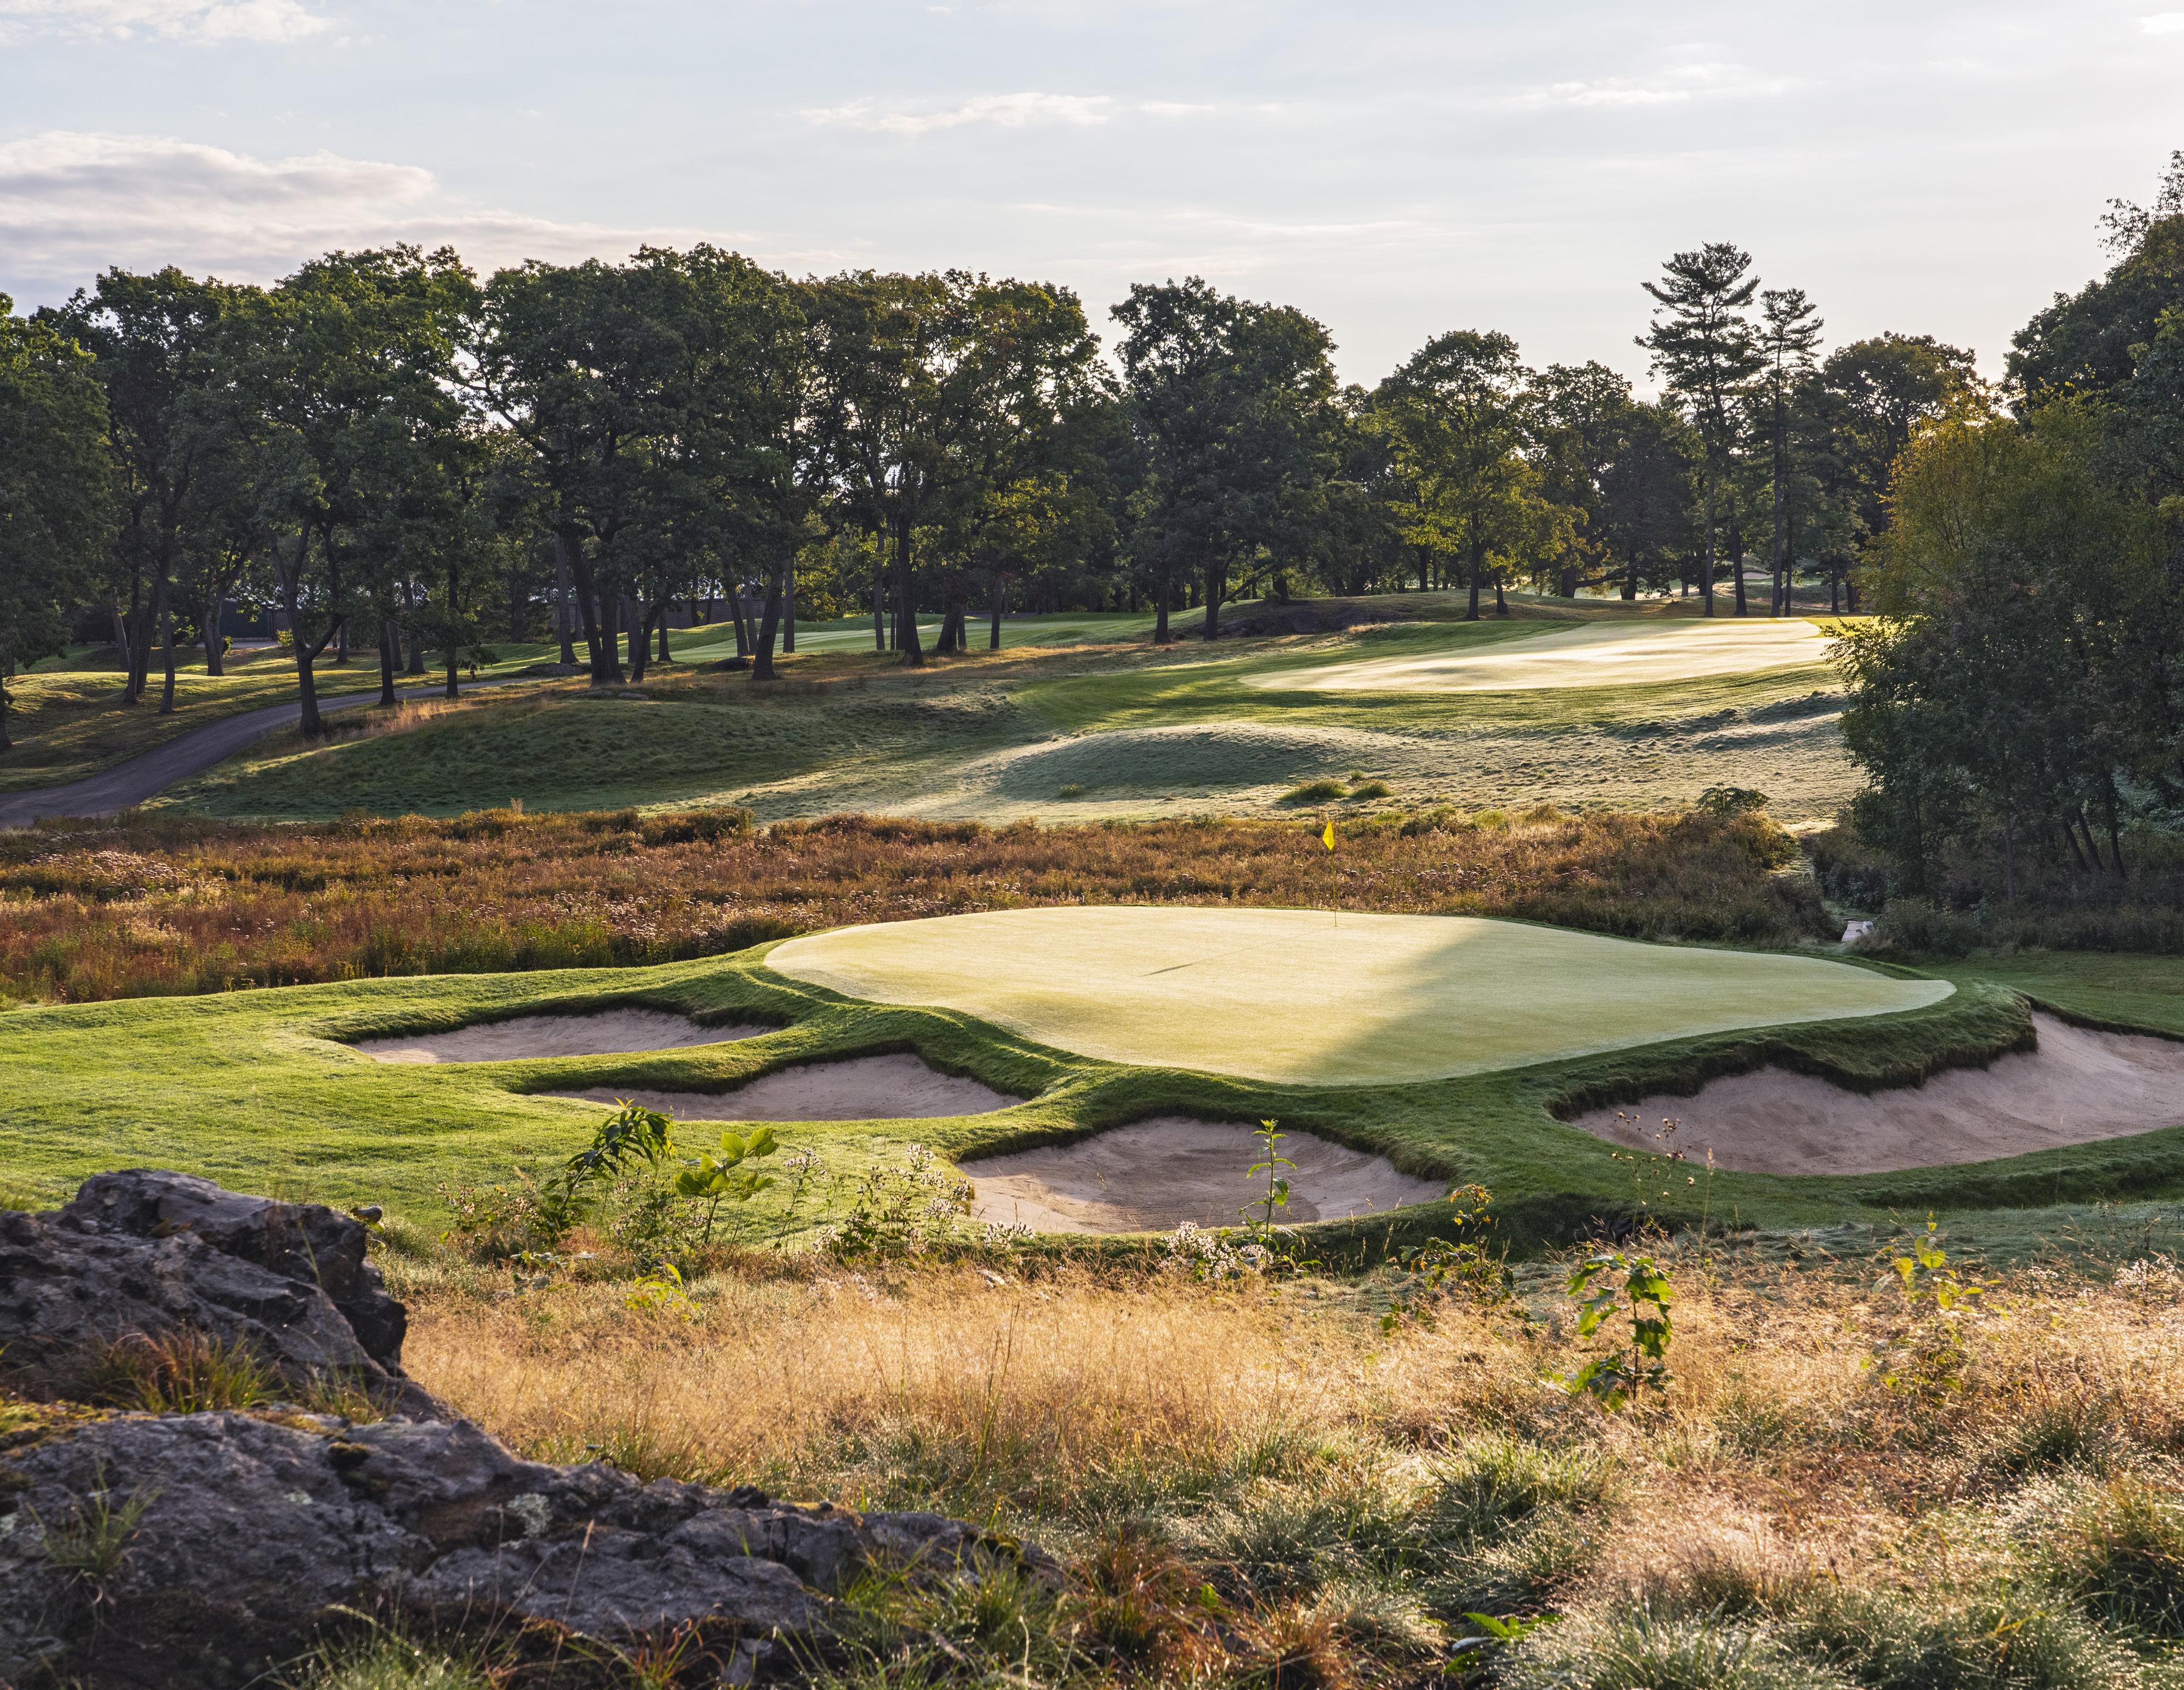 The Top 5 Golf Courses in New England